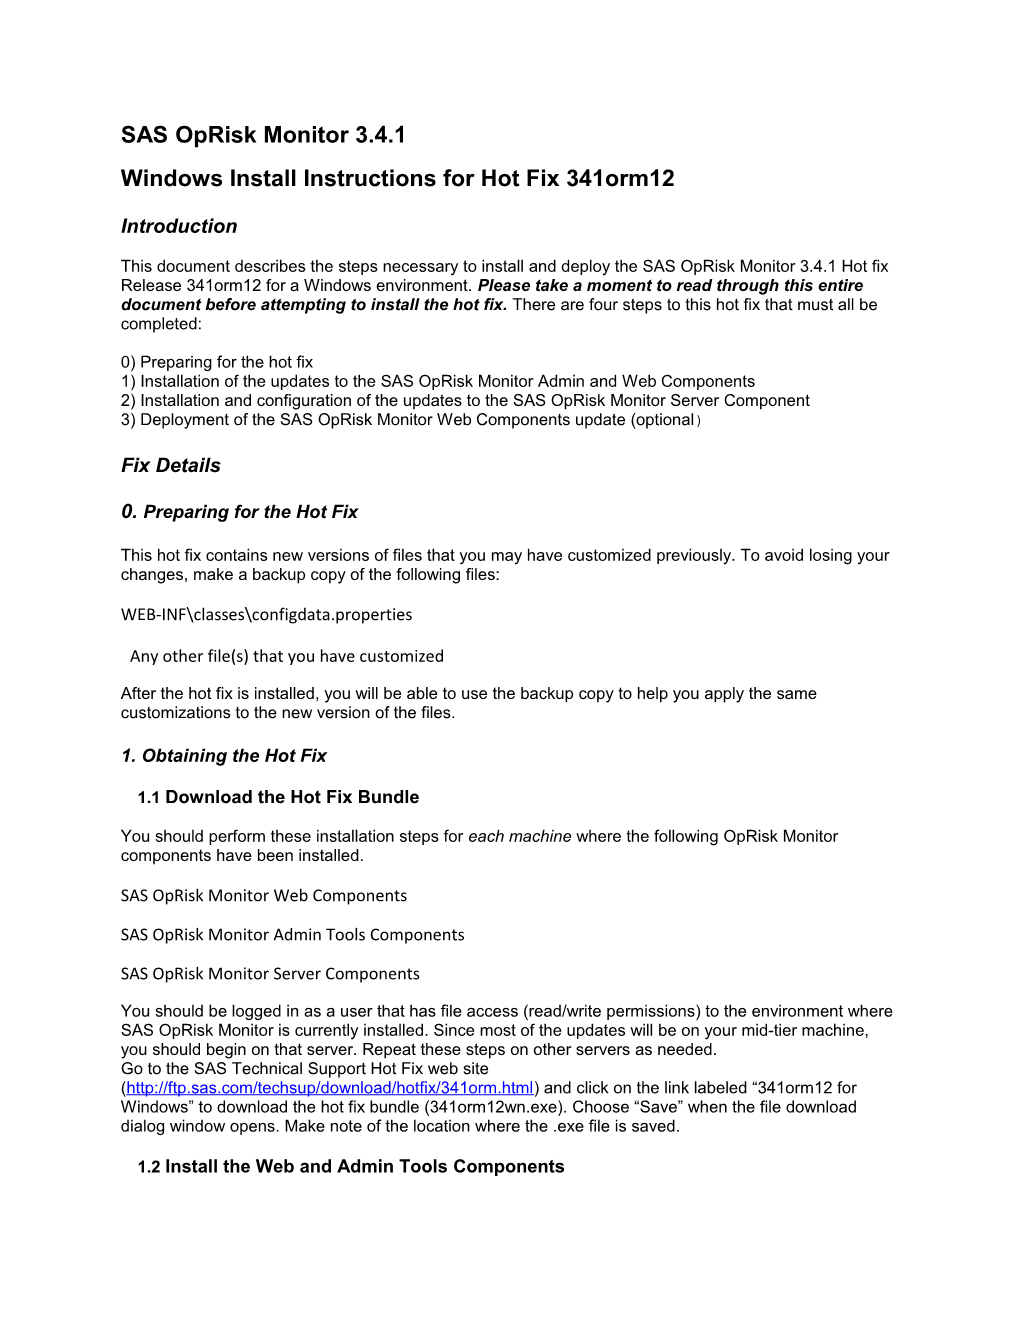 Windows Install Instructions for Hot Fix 341Orm12